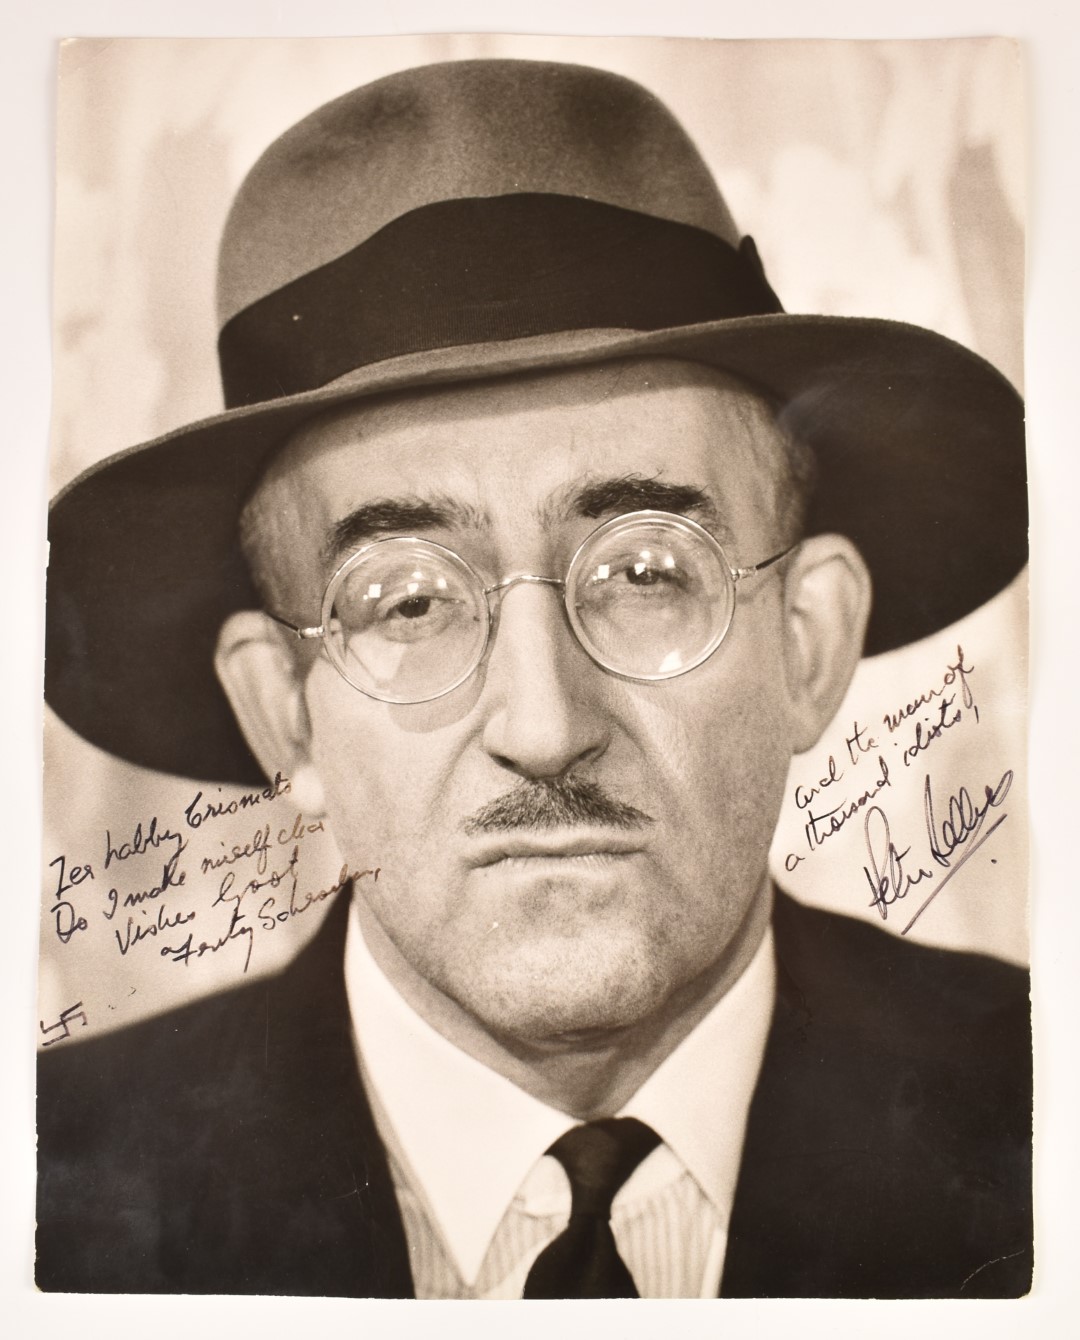 Peter Sellers autographed 25 x 20cm photograph as the character Herr Schroeder.